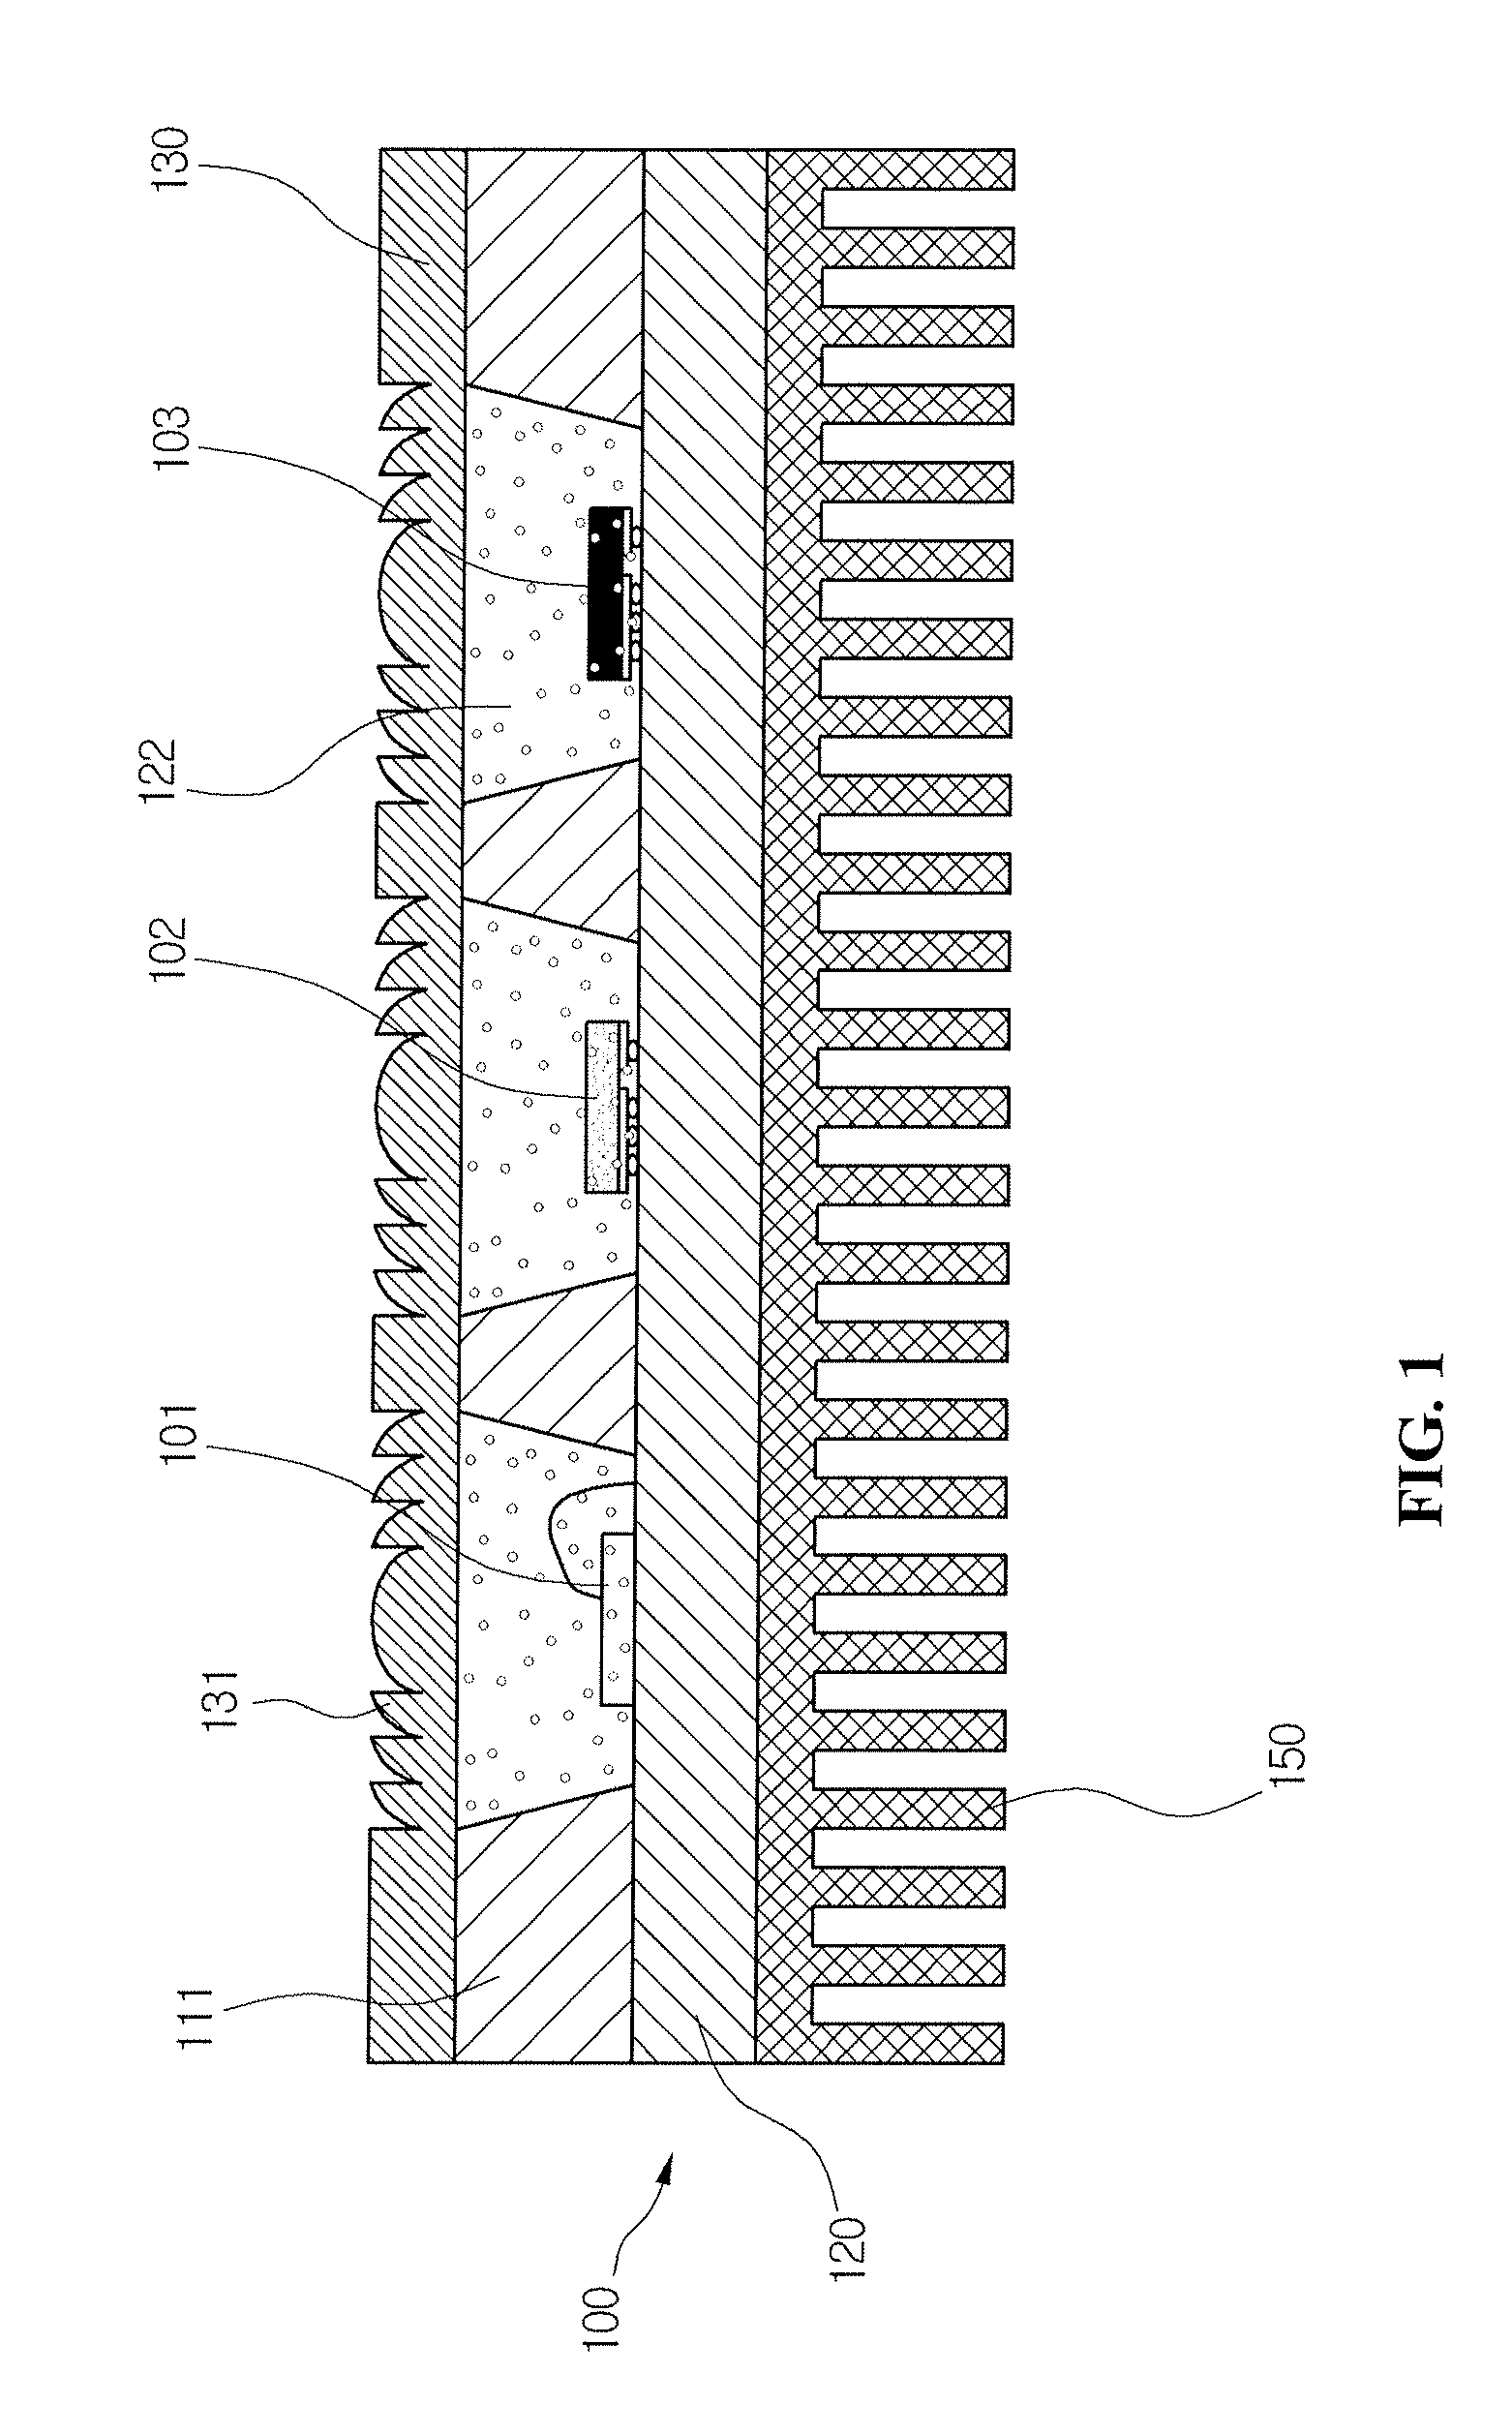 Package for light emitting device and method for packaging the same